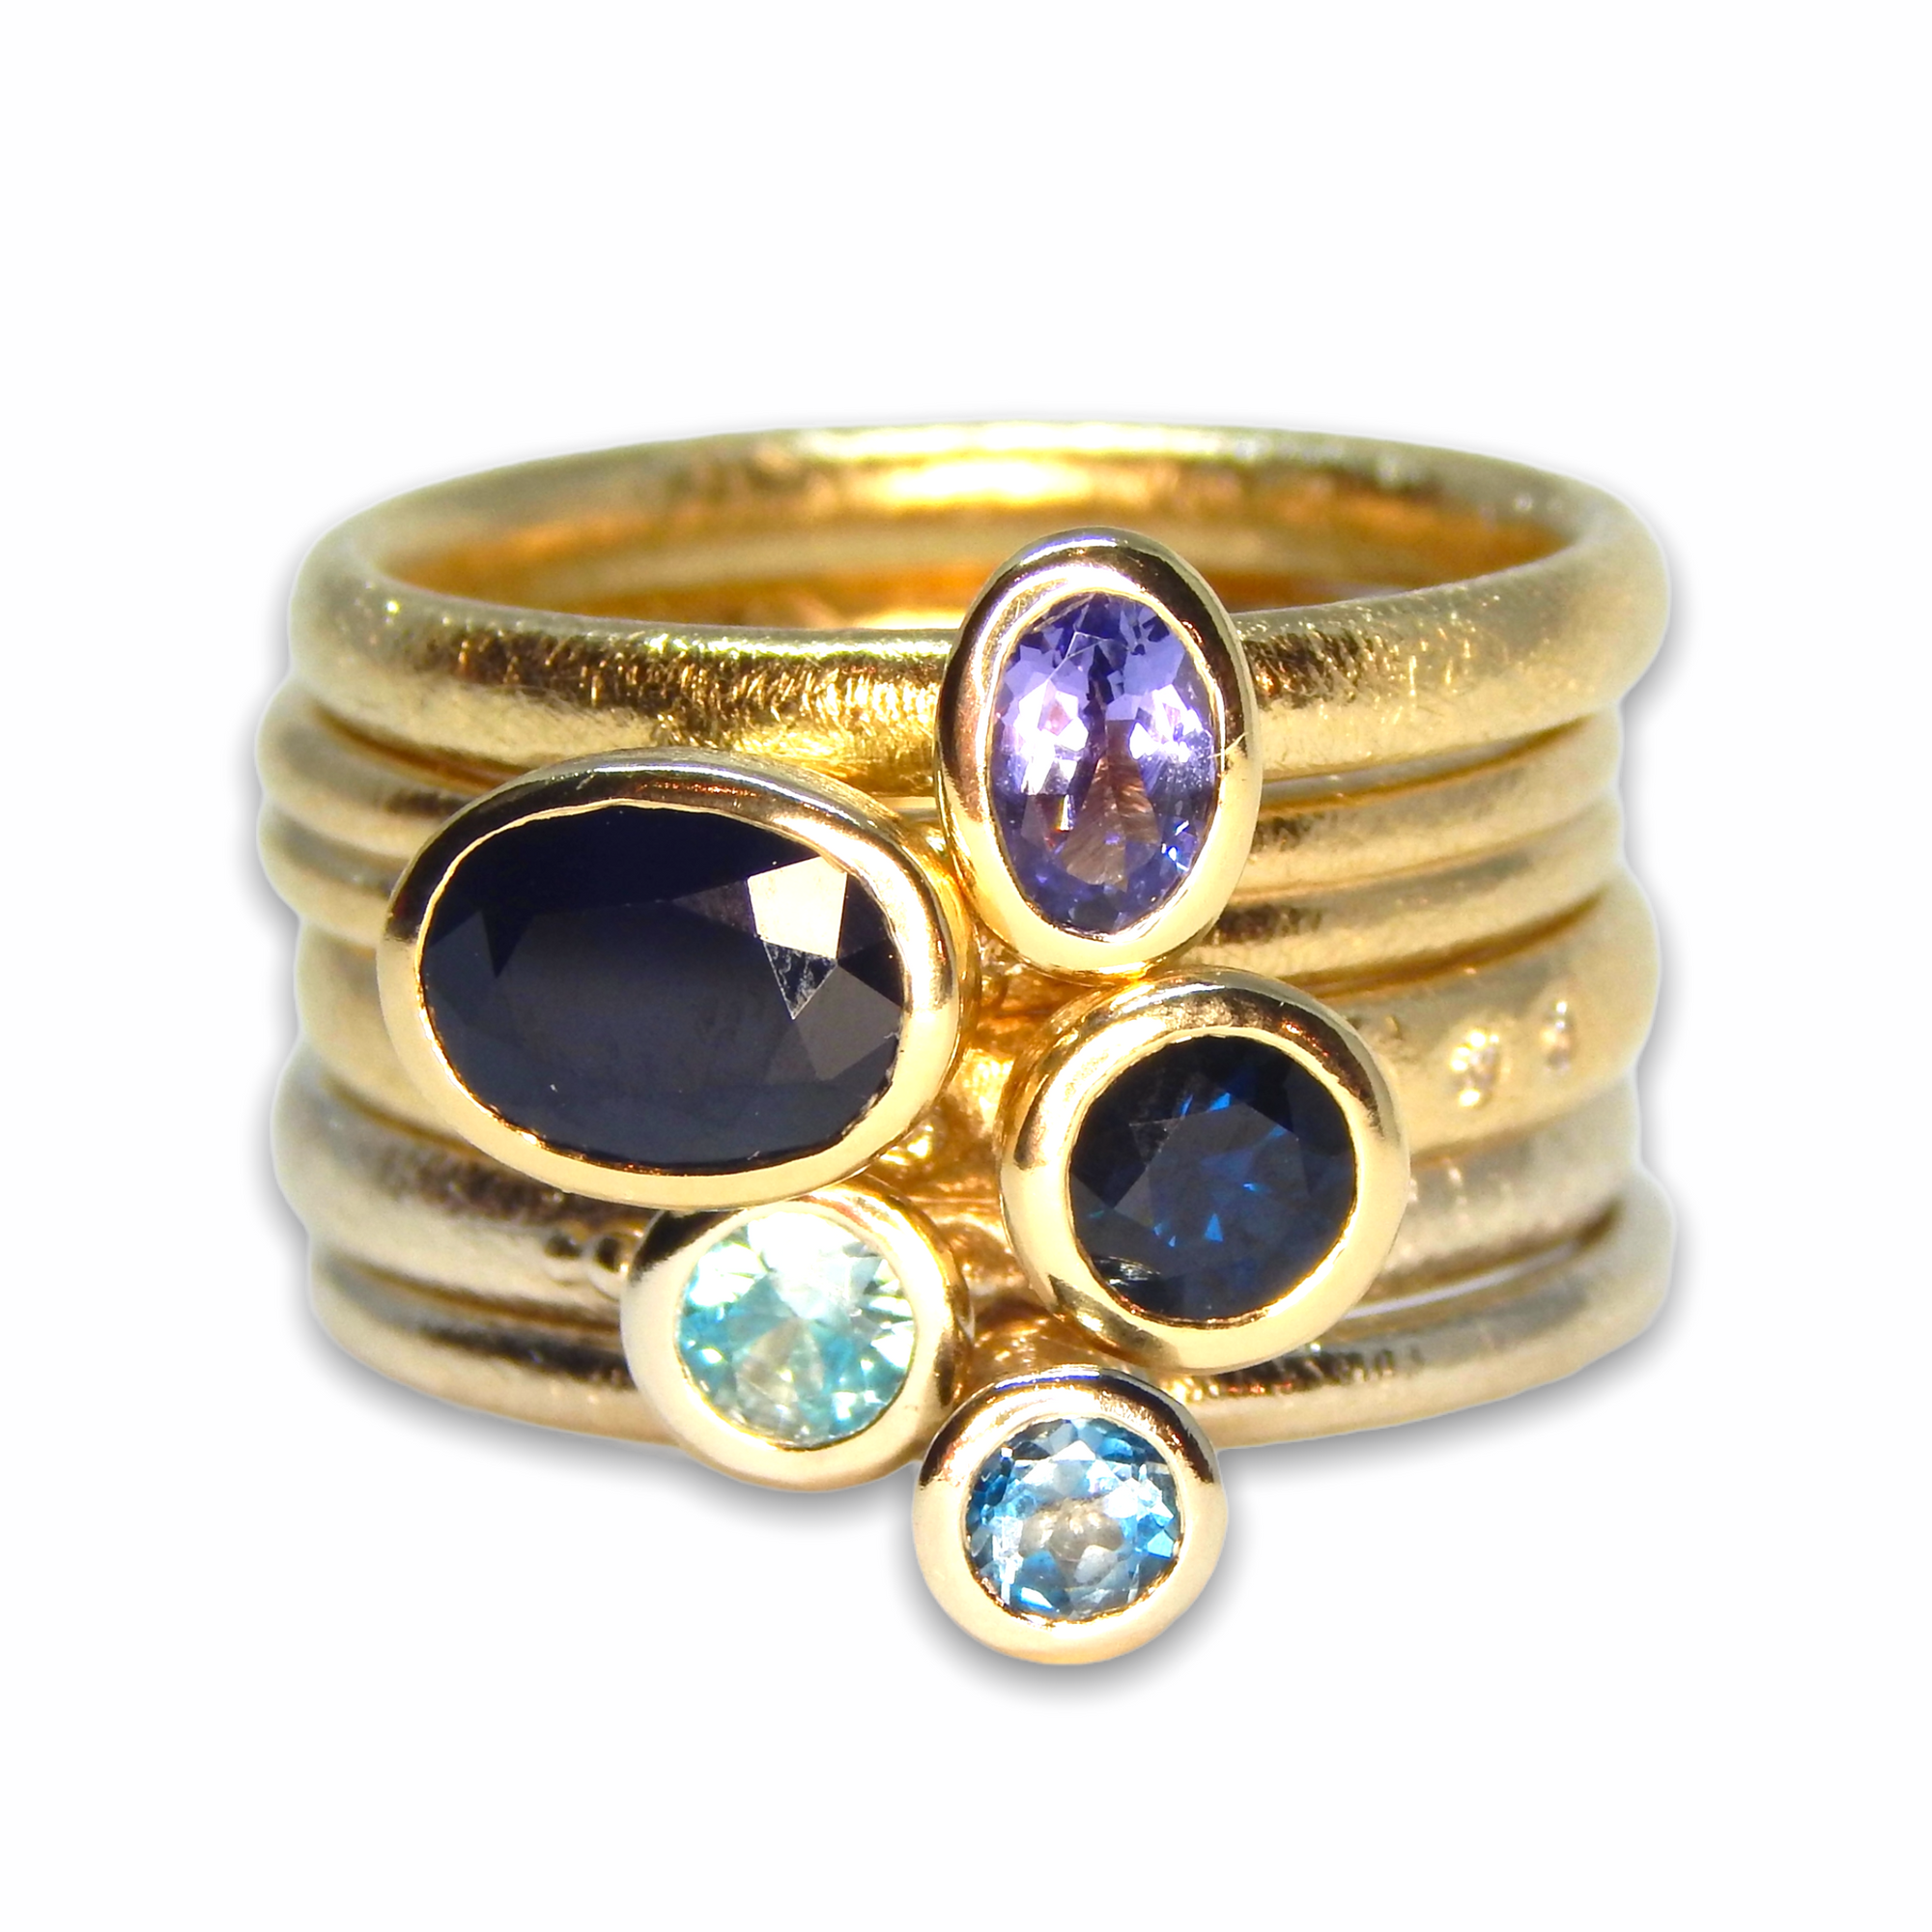 Charlotte's Custom Bespoke Blue Stacker Ring Set  | In 9ct Yellow Gold | Set With A Blue Sapphire, Blue Topaz, Blue Zircon, Tanzanite And Diamonds